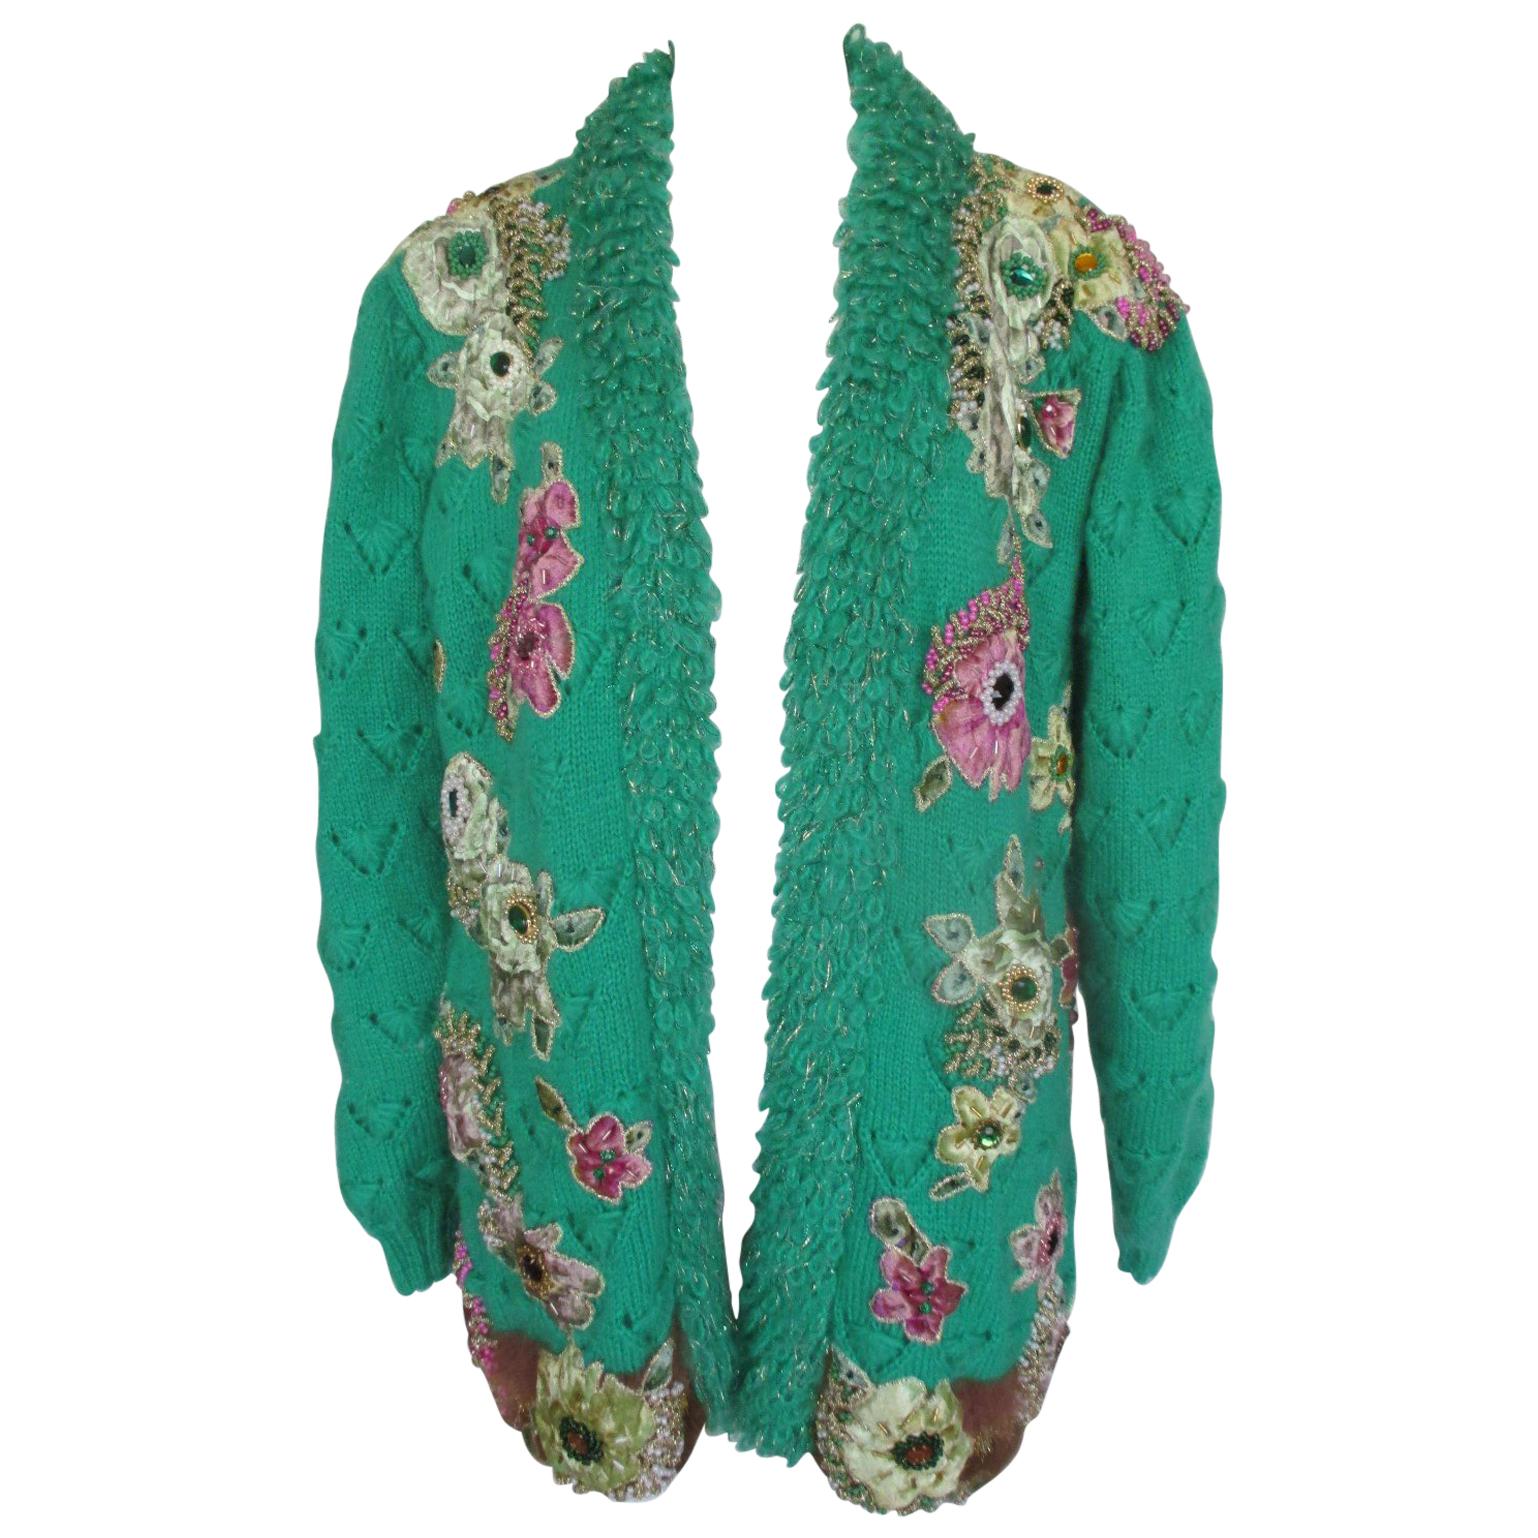 embroidered cardigan with flower appliqués